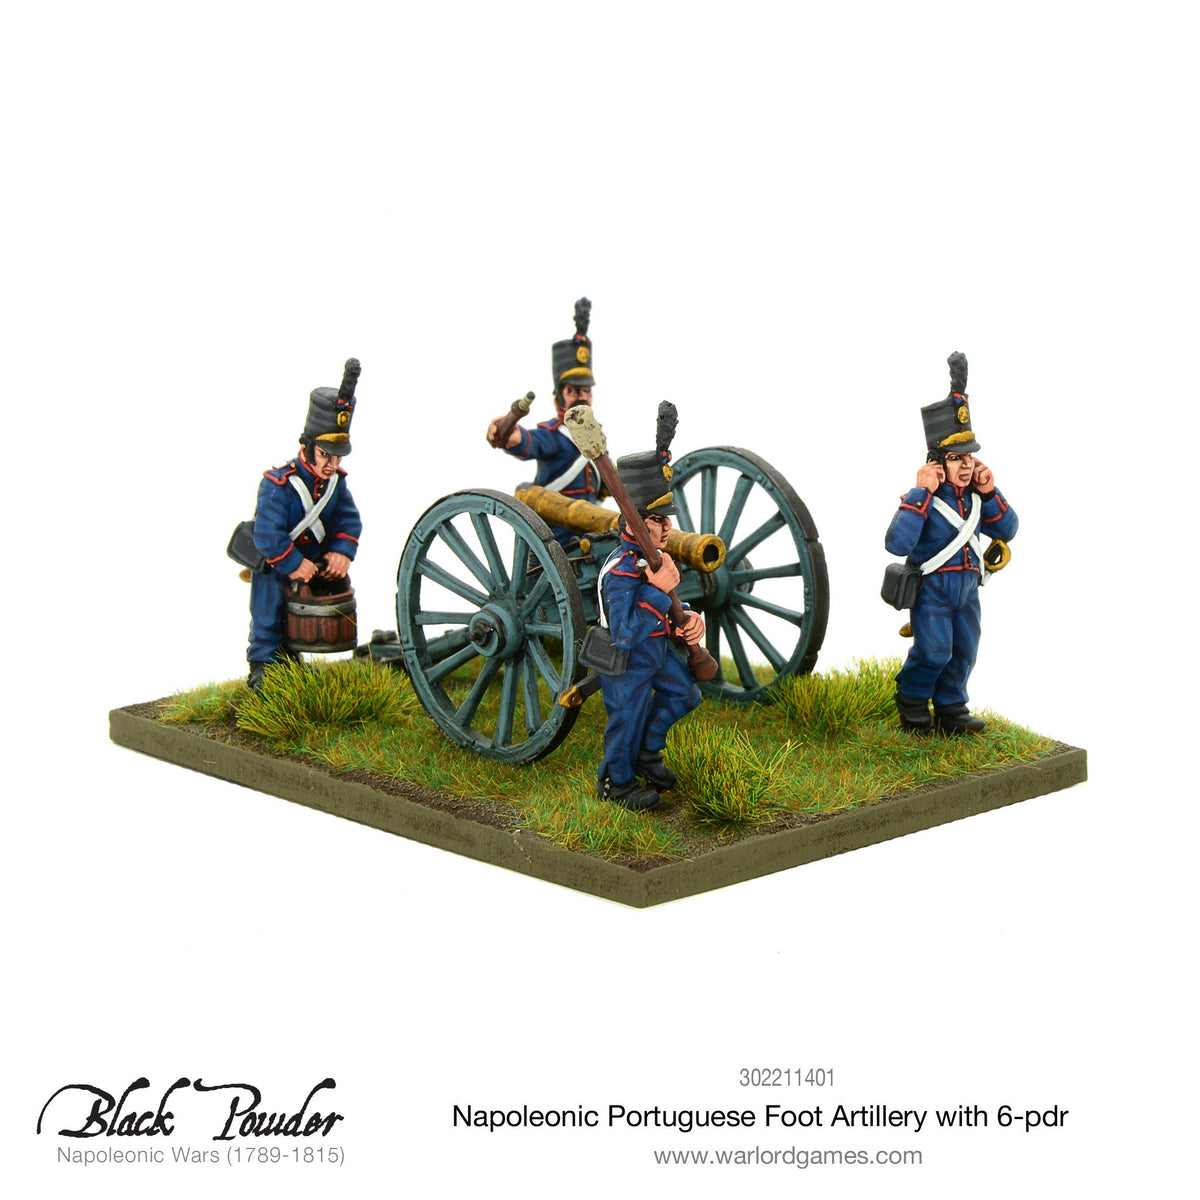 Napoleonic Portuguese Foot Artillery with 6-pdr